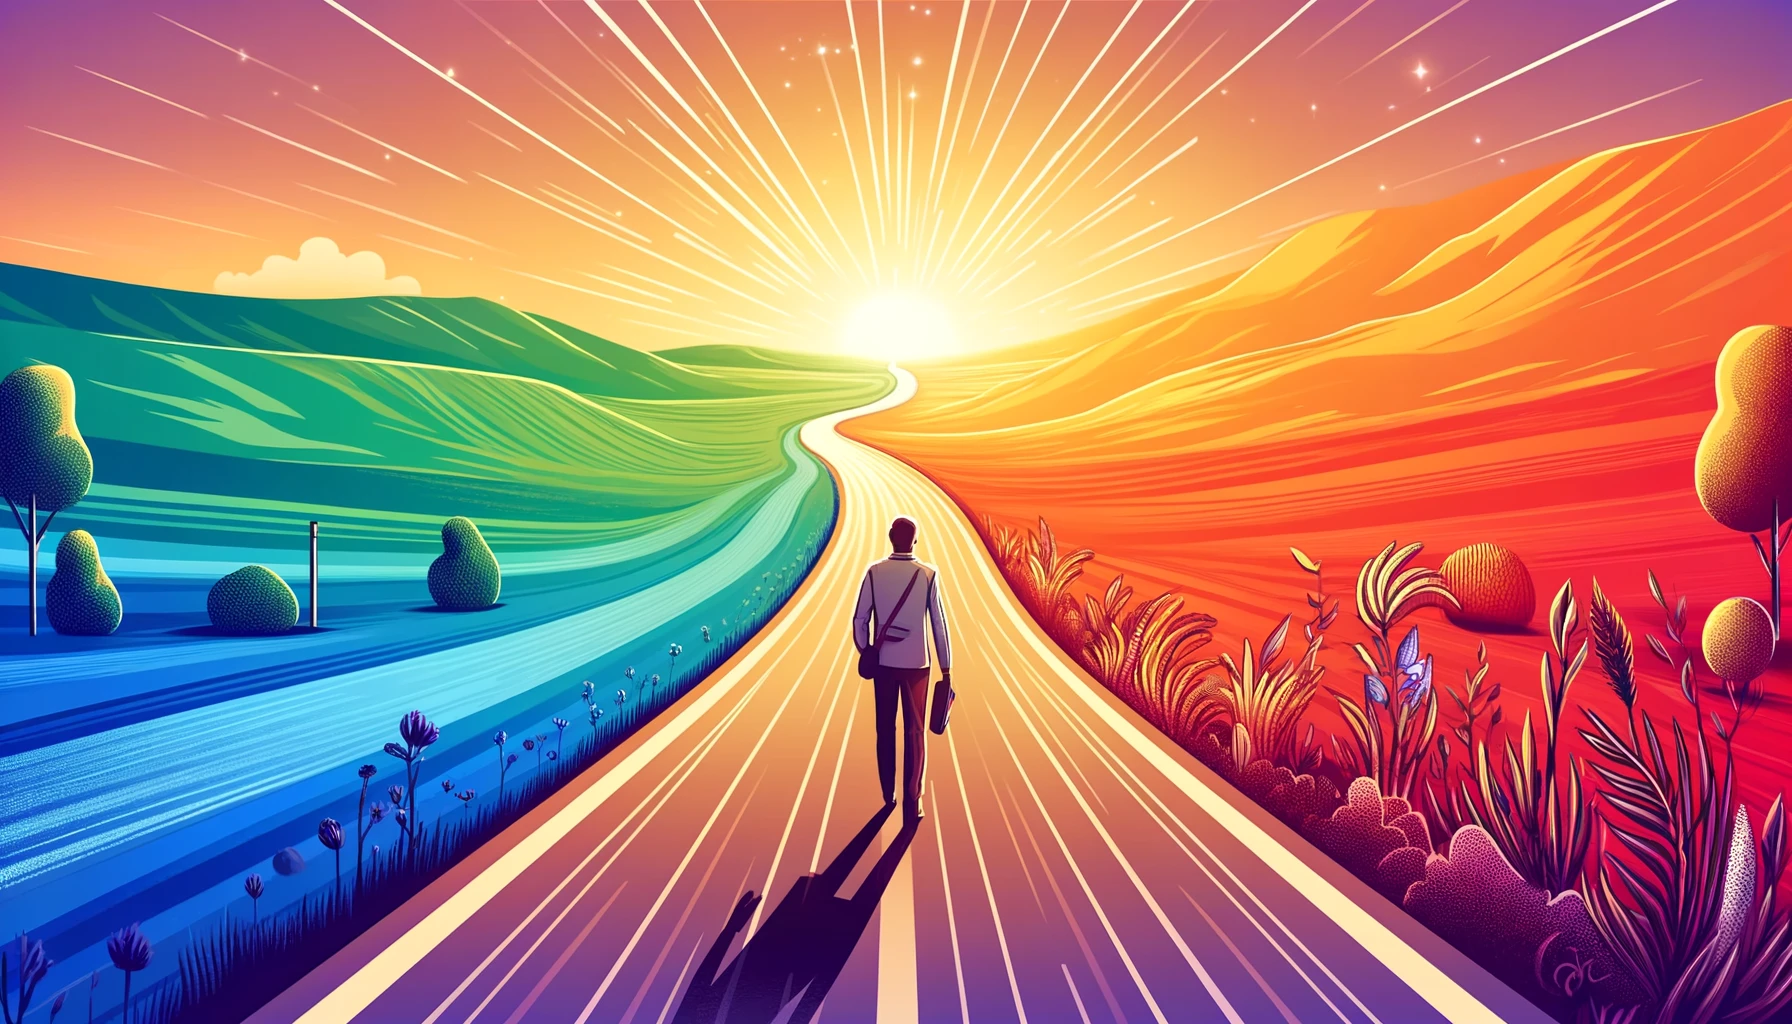 A man confidently walks on a symbolic road towards a bright horizon, with signs of guidance and protection, symbolizing a journey of personal growth and safe passage.